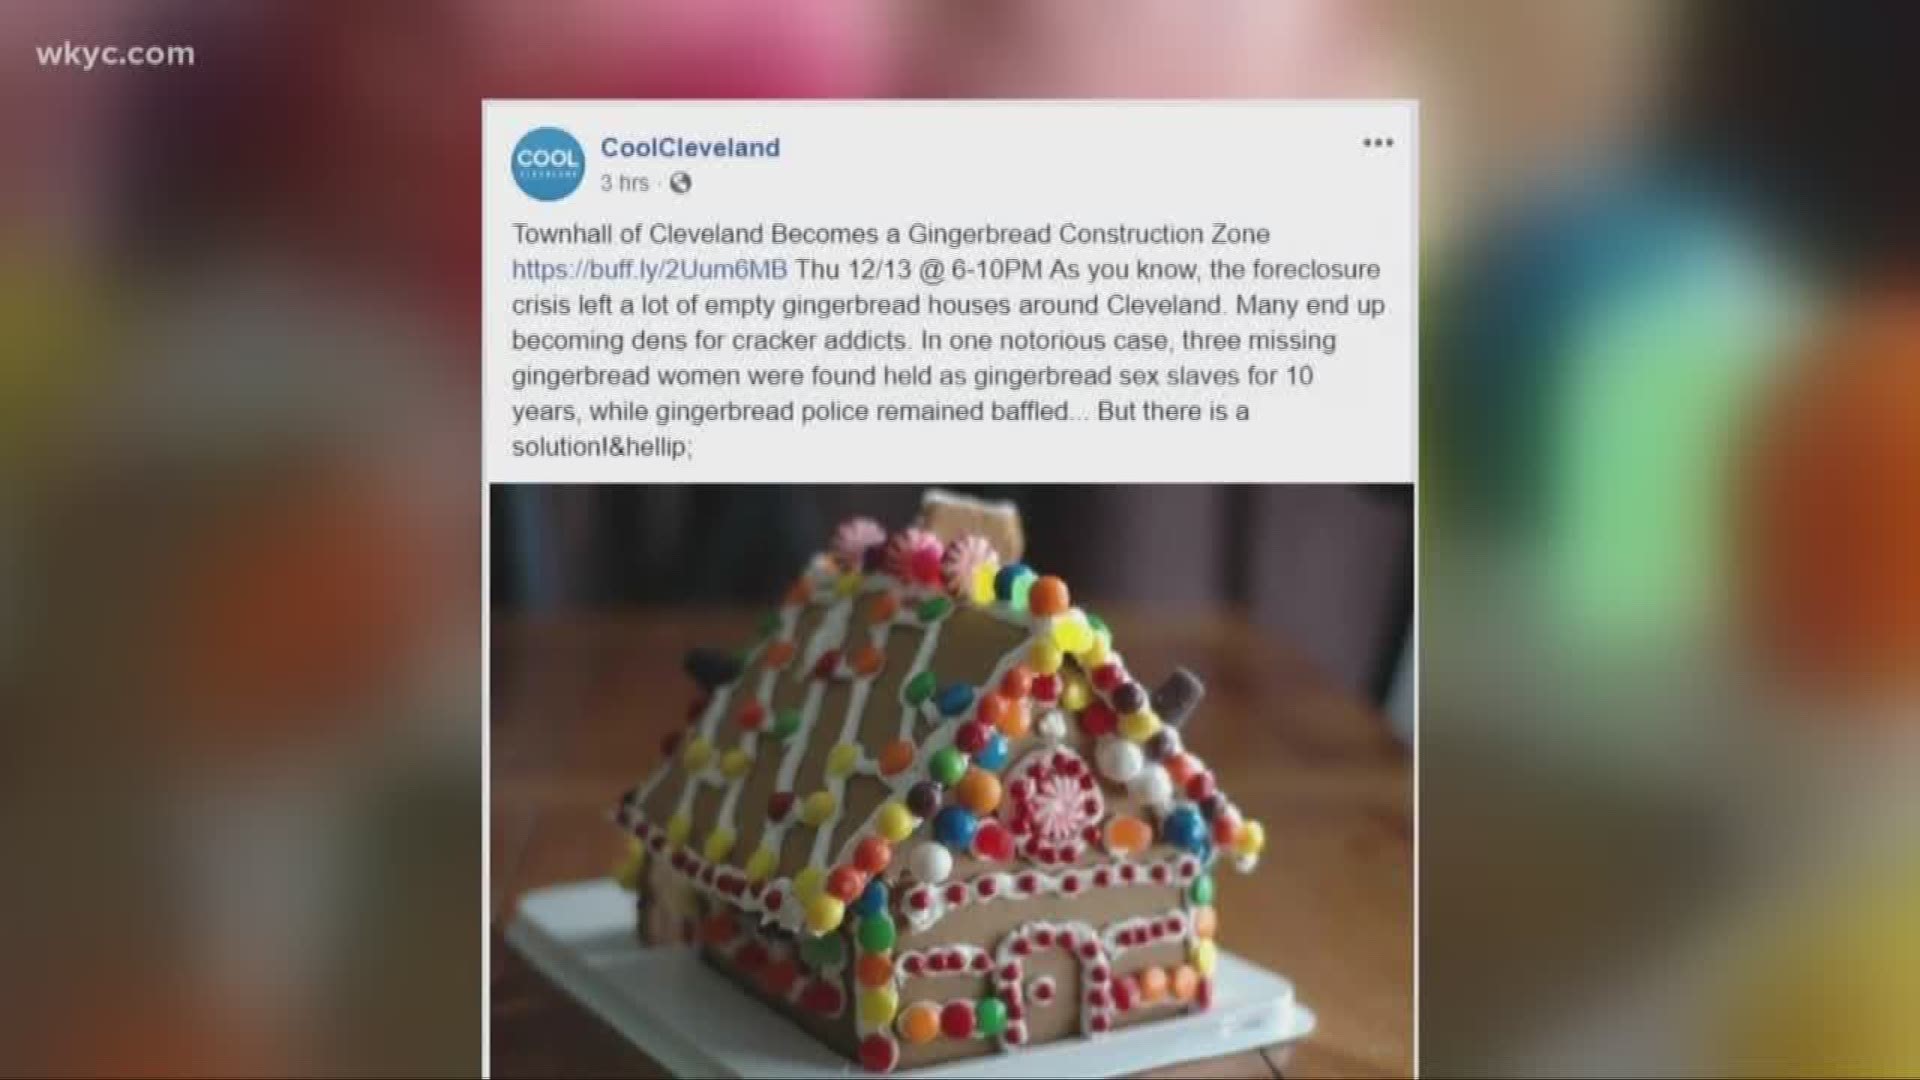 CoolCleveland publisher apologizes after 'appalling' post about Townhall Gingerbread event